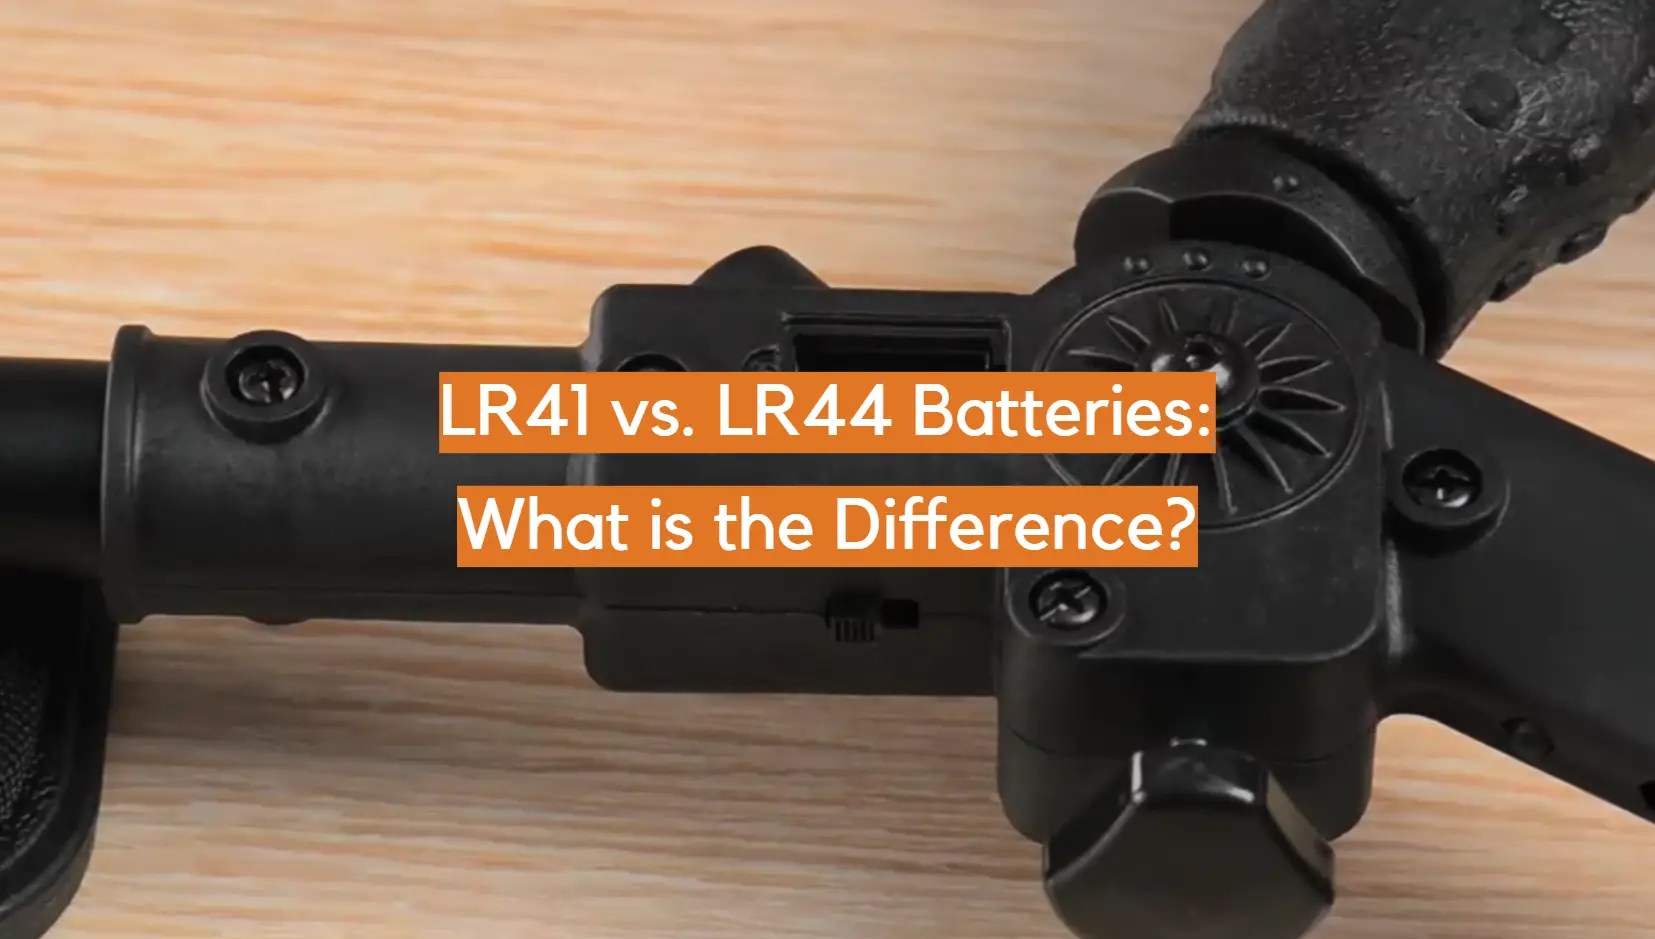 LR41 vs. LR44 Batteries: What is the Difference?